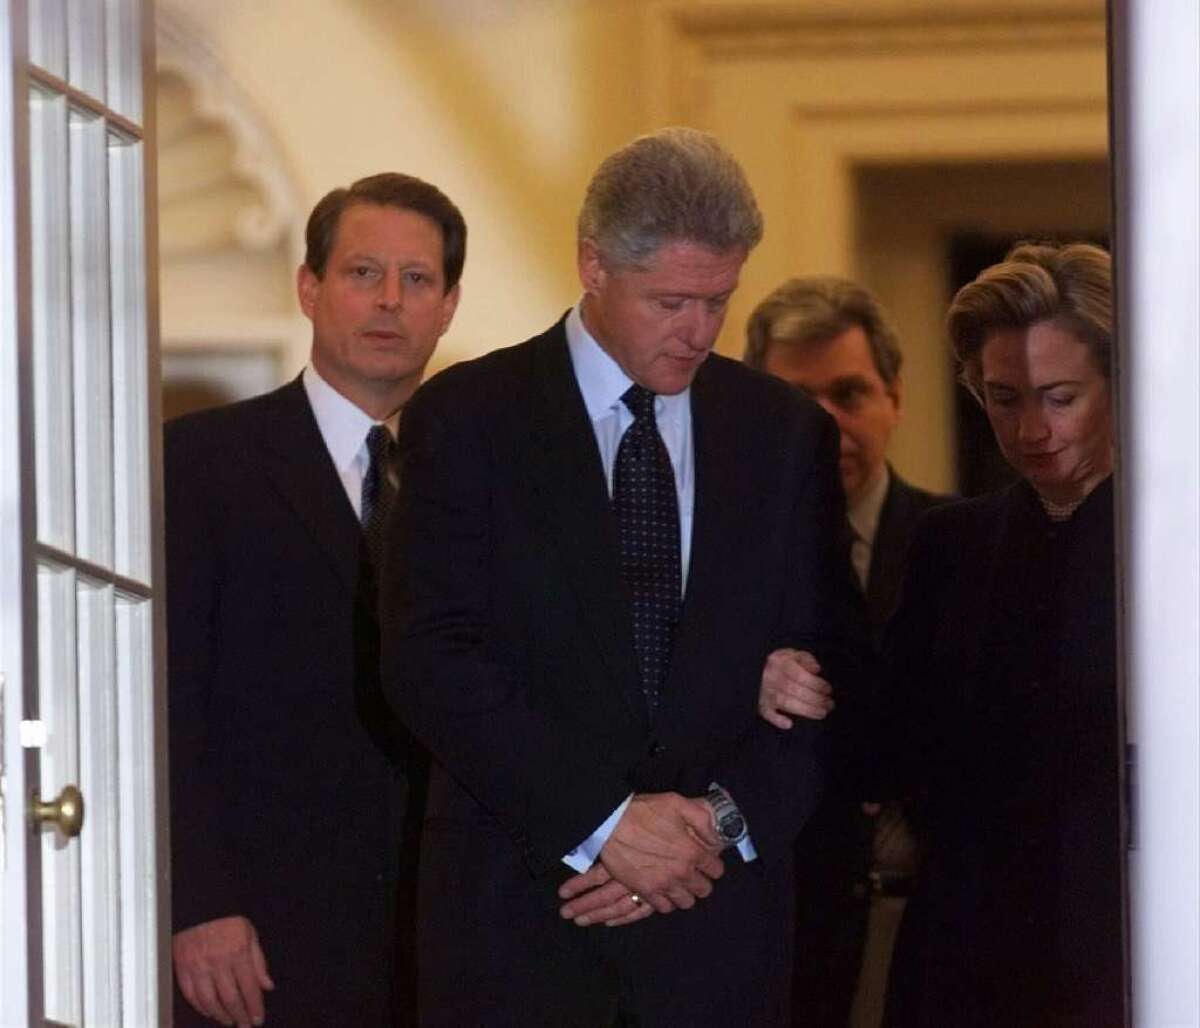 President Bill Clinton at the White House in December 1998, flanked by Vice President Al Gore and First Lady Hillary Rodham Clinton, after the House vote to impeach him.